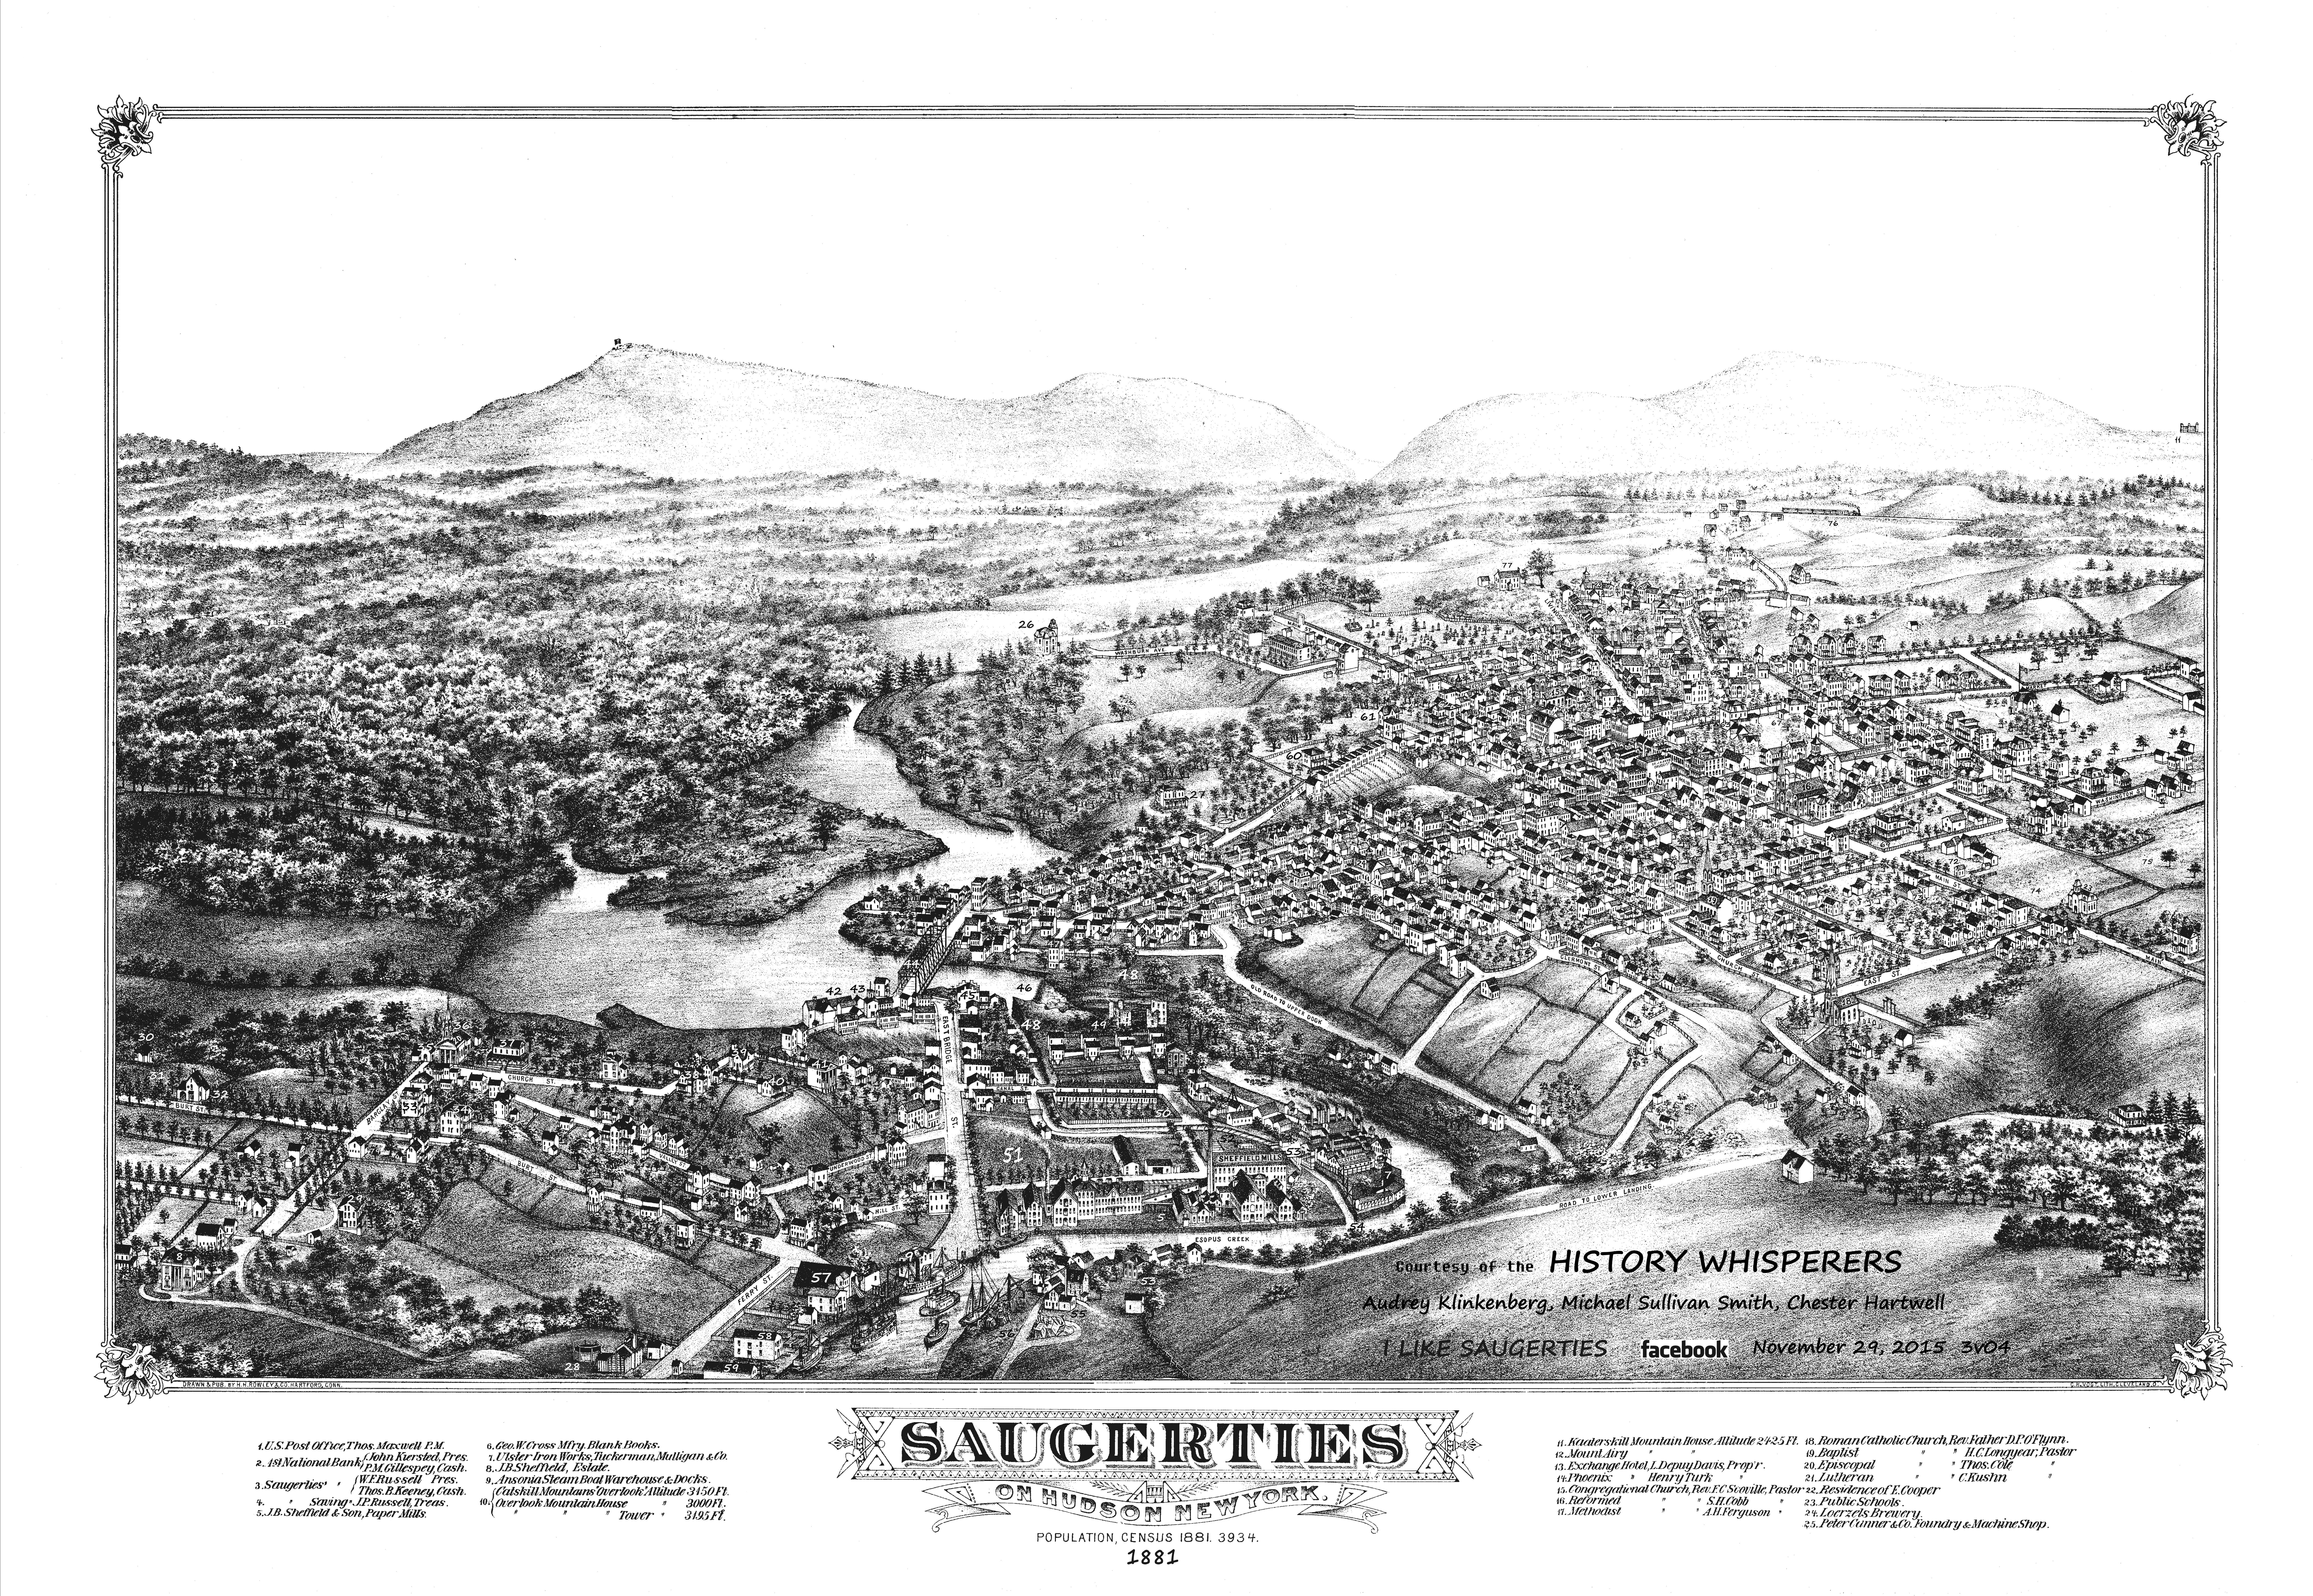 Detailed 1881 map of Saugerties.  An aerial map, looking northwest with the red bridget and the Esopus Creek in the foreground and the Catskills in the background.